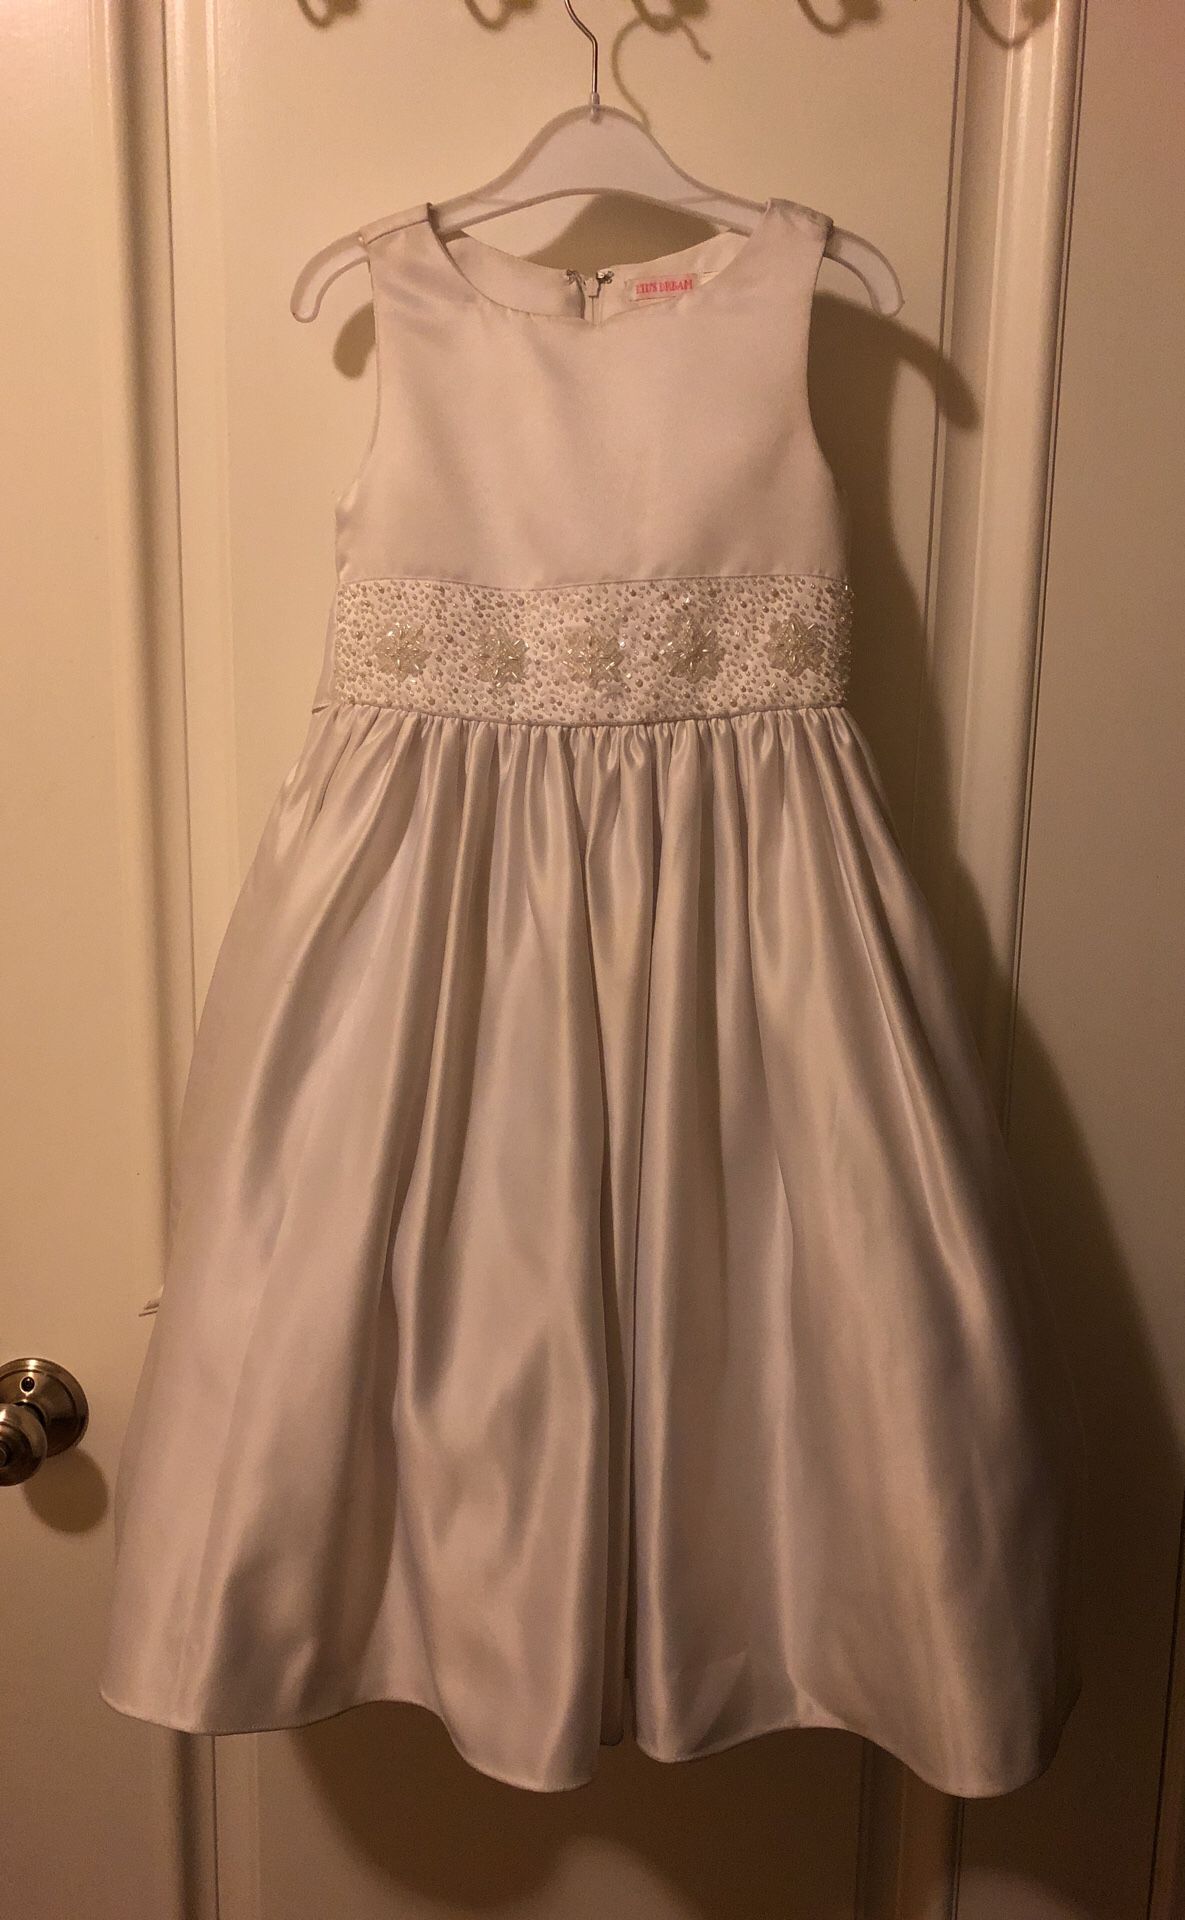 Size 5/6 Flower girl dress, white satin. Only worn once. May need dry clean.